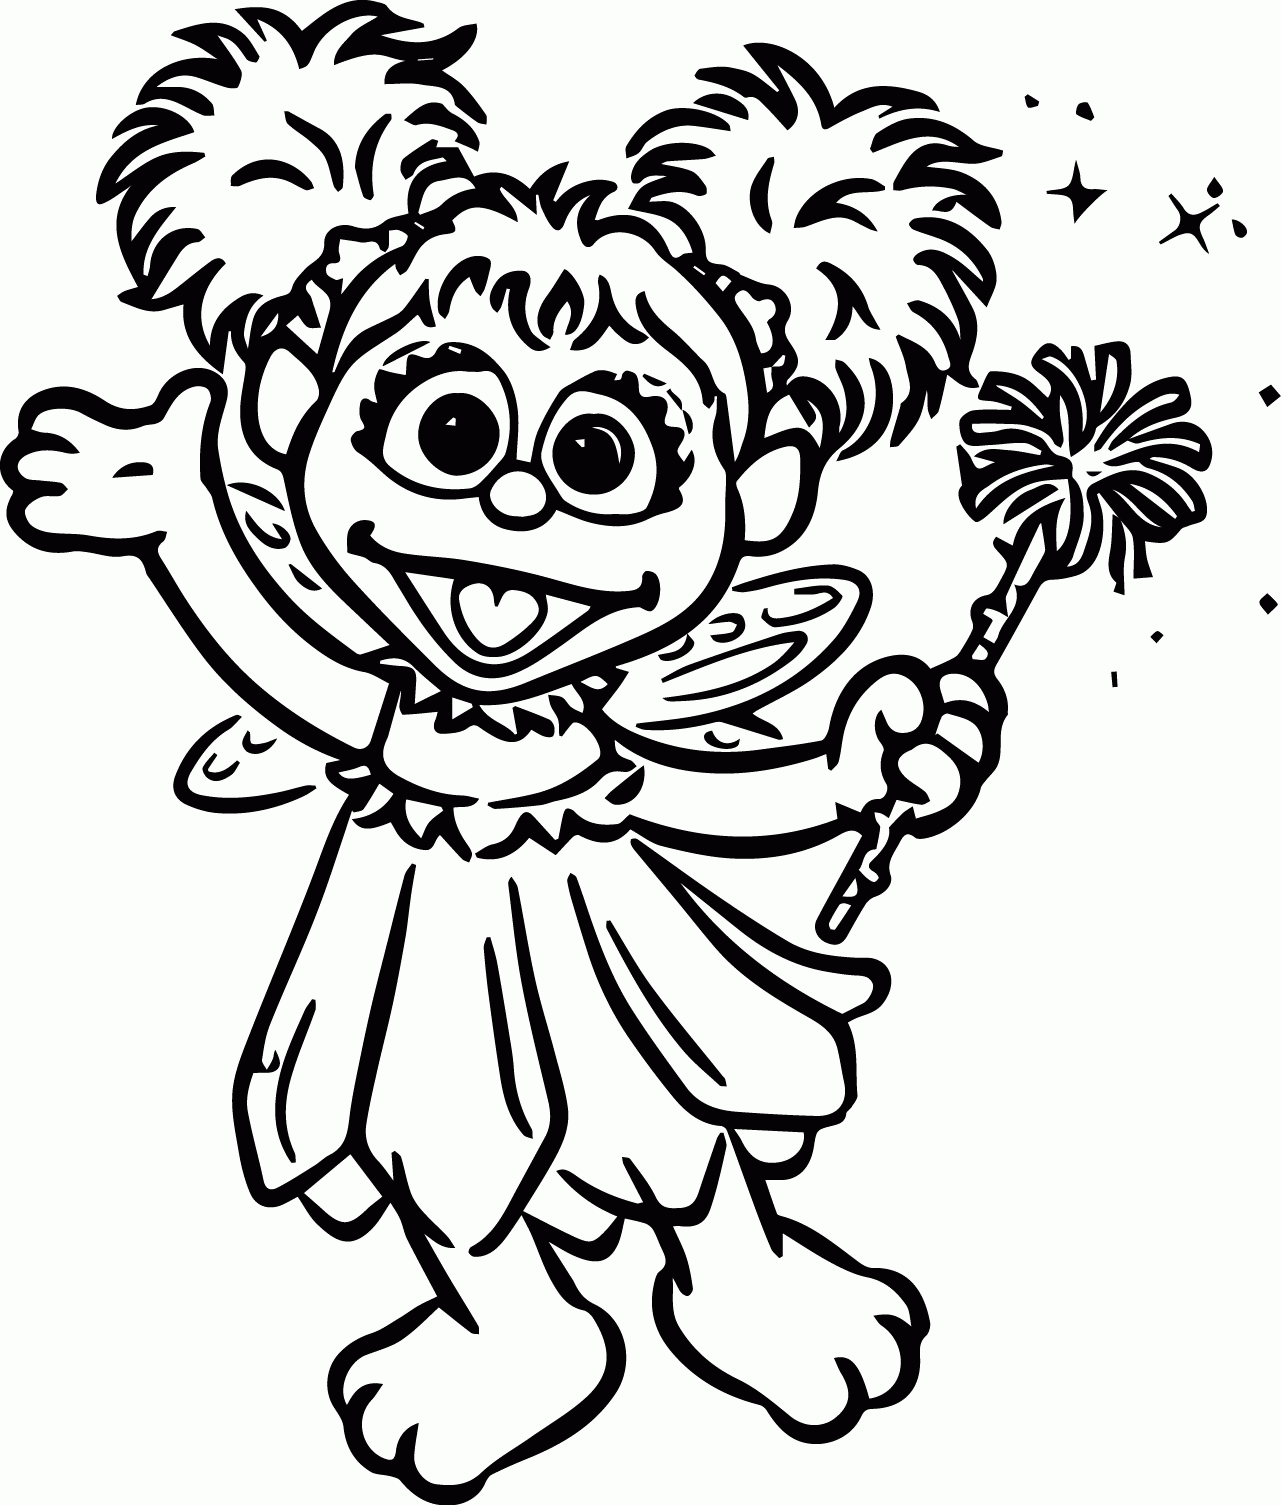 Abby Cadabby Coloring Page - Coloring Pages for Kids and for Adults